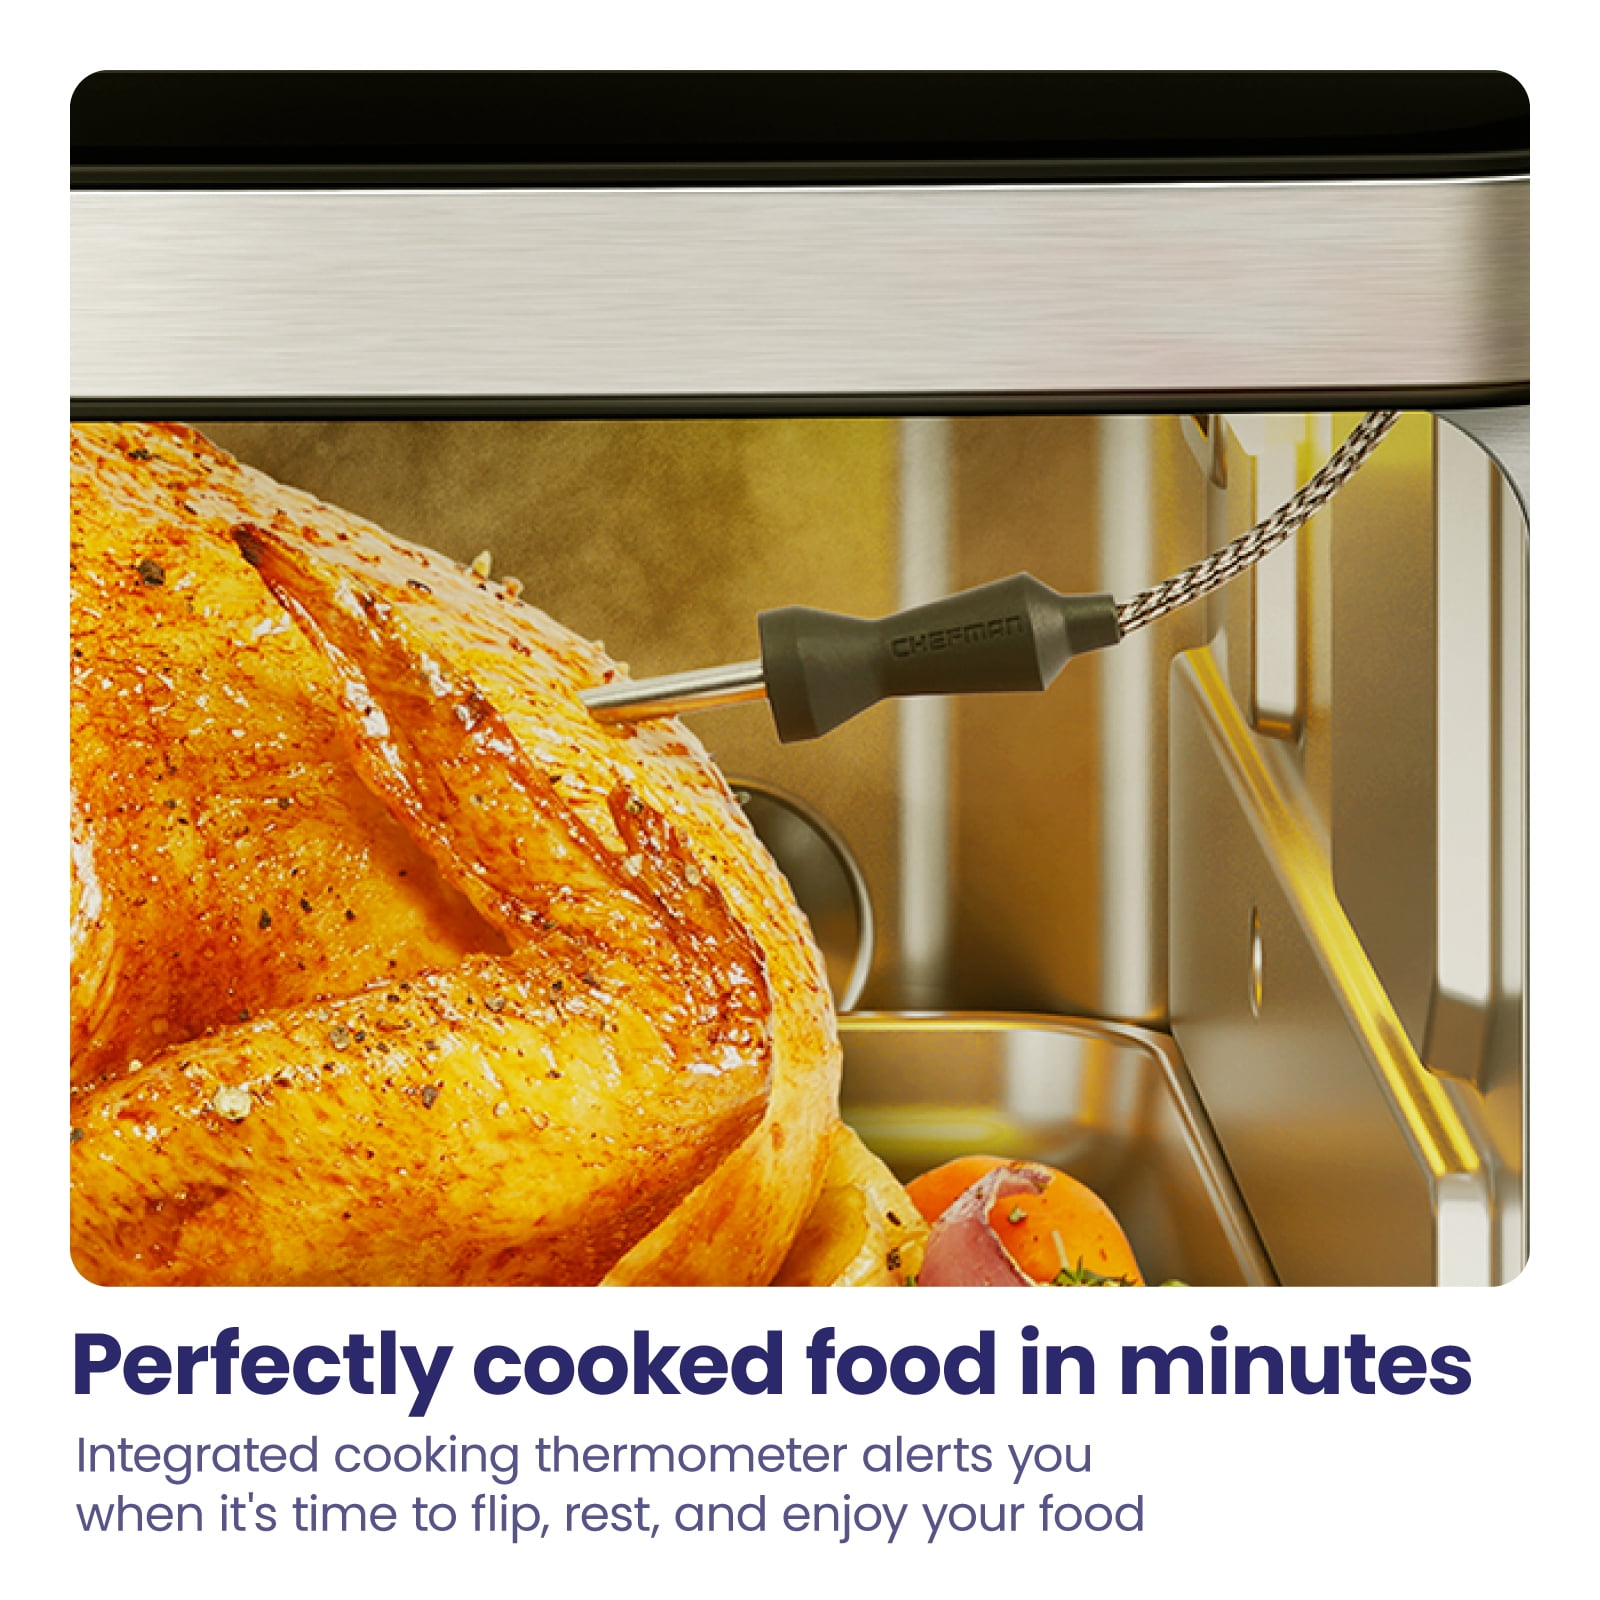 Walmart secret clearance deal: This Chefman Air Fryer and Oven